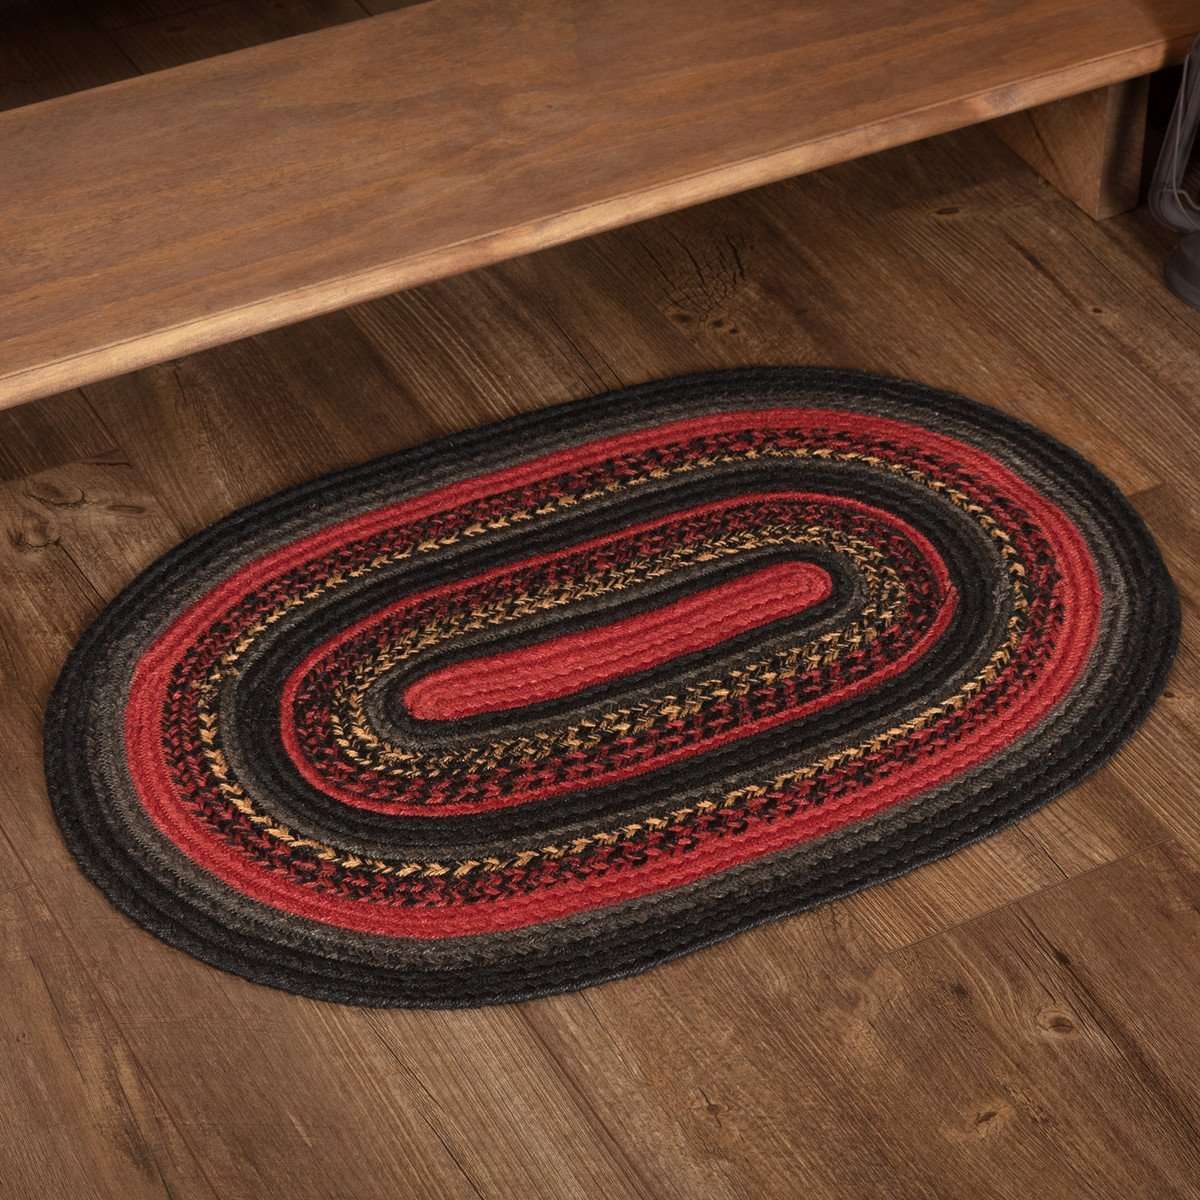 Cumberland Jute Braided Rugs Oval VHC Brands Rugs VHC Brands 20" x 30" 